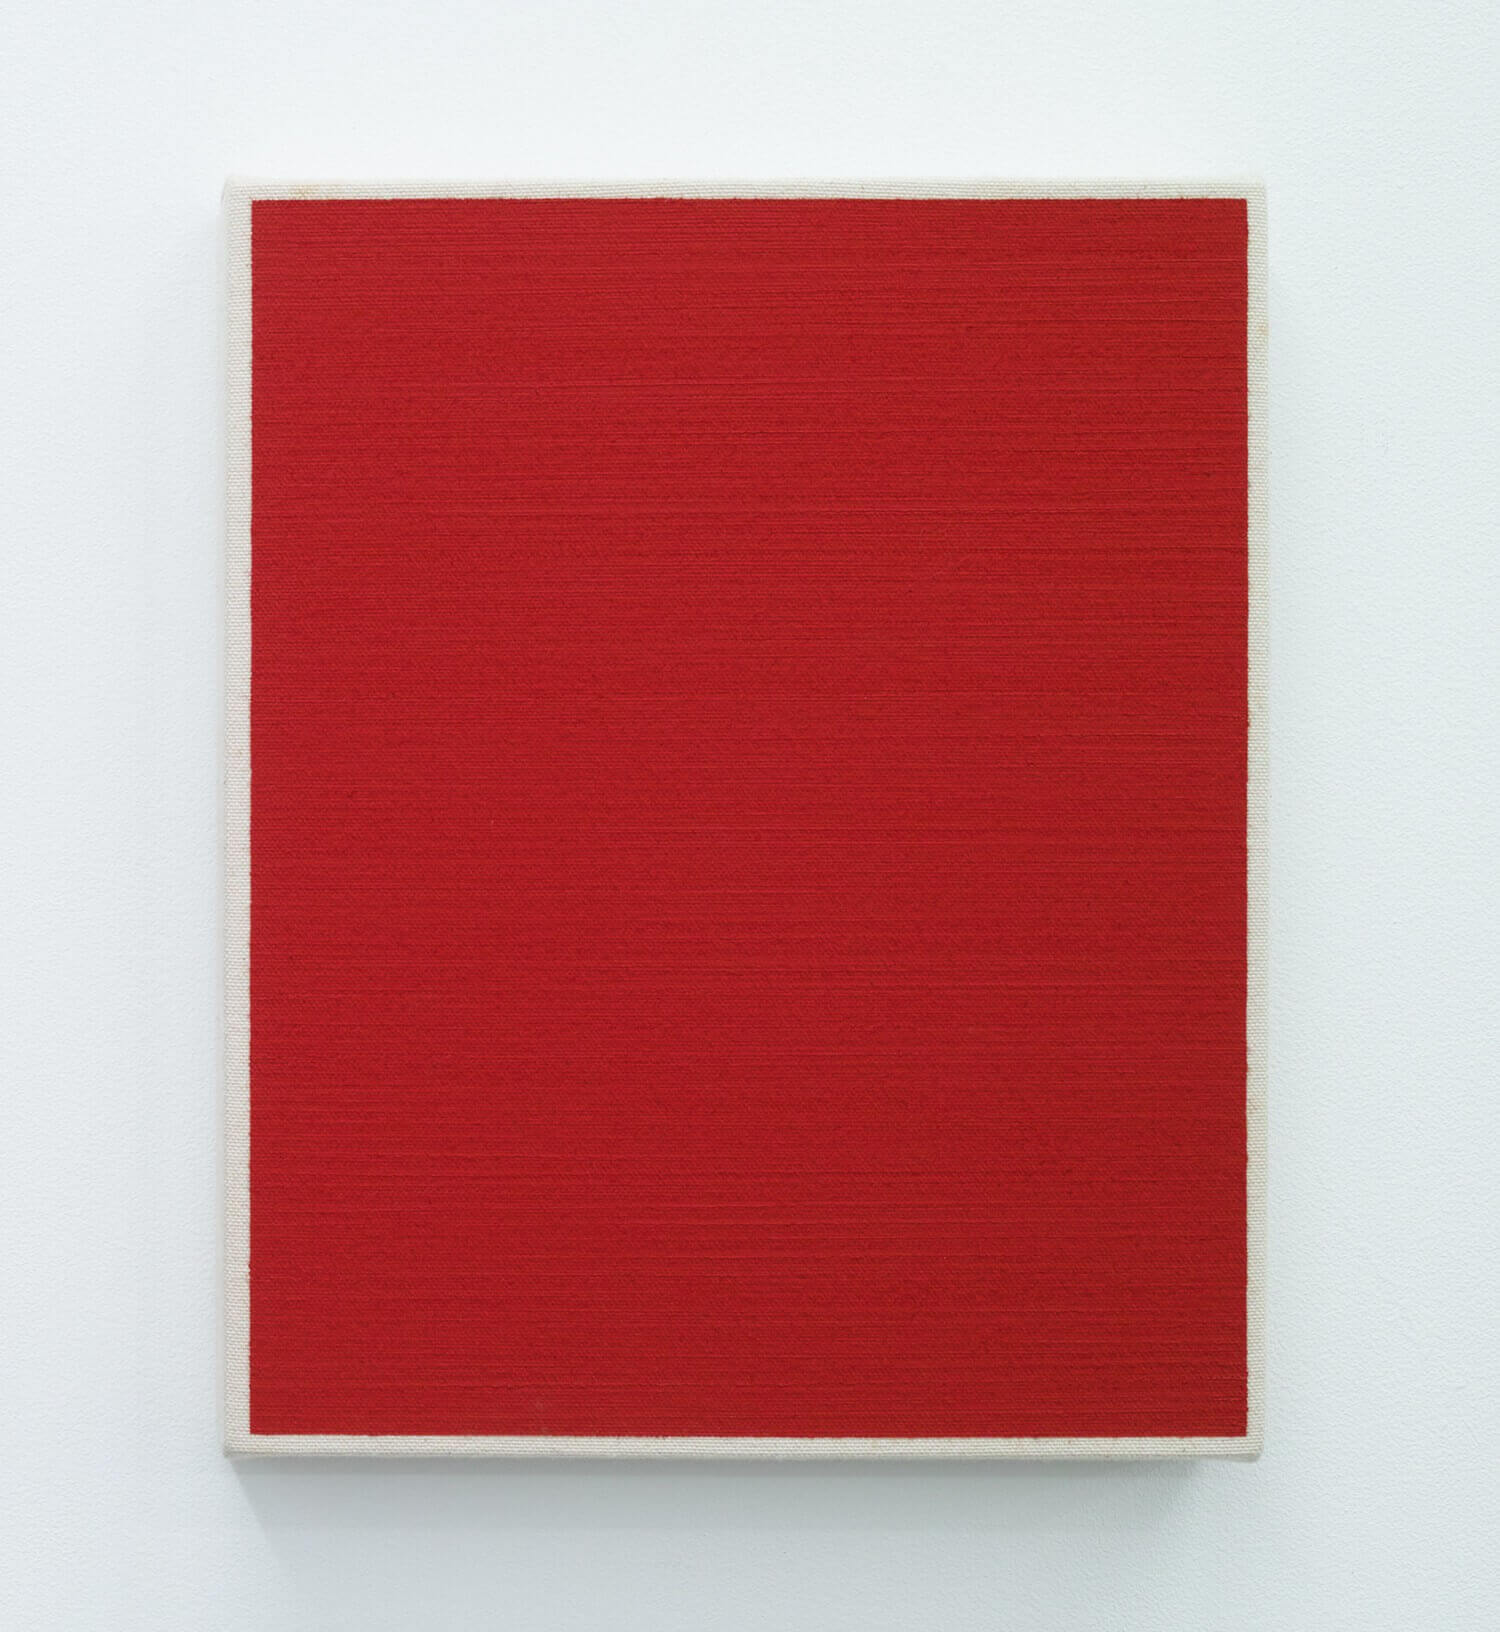 Text No.479 / oil, pigment on cotton, 278 x 220 x 33 mm, 2004